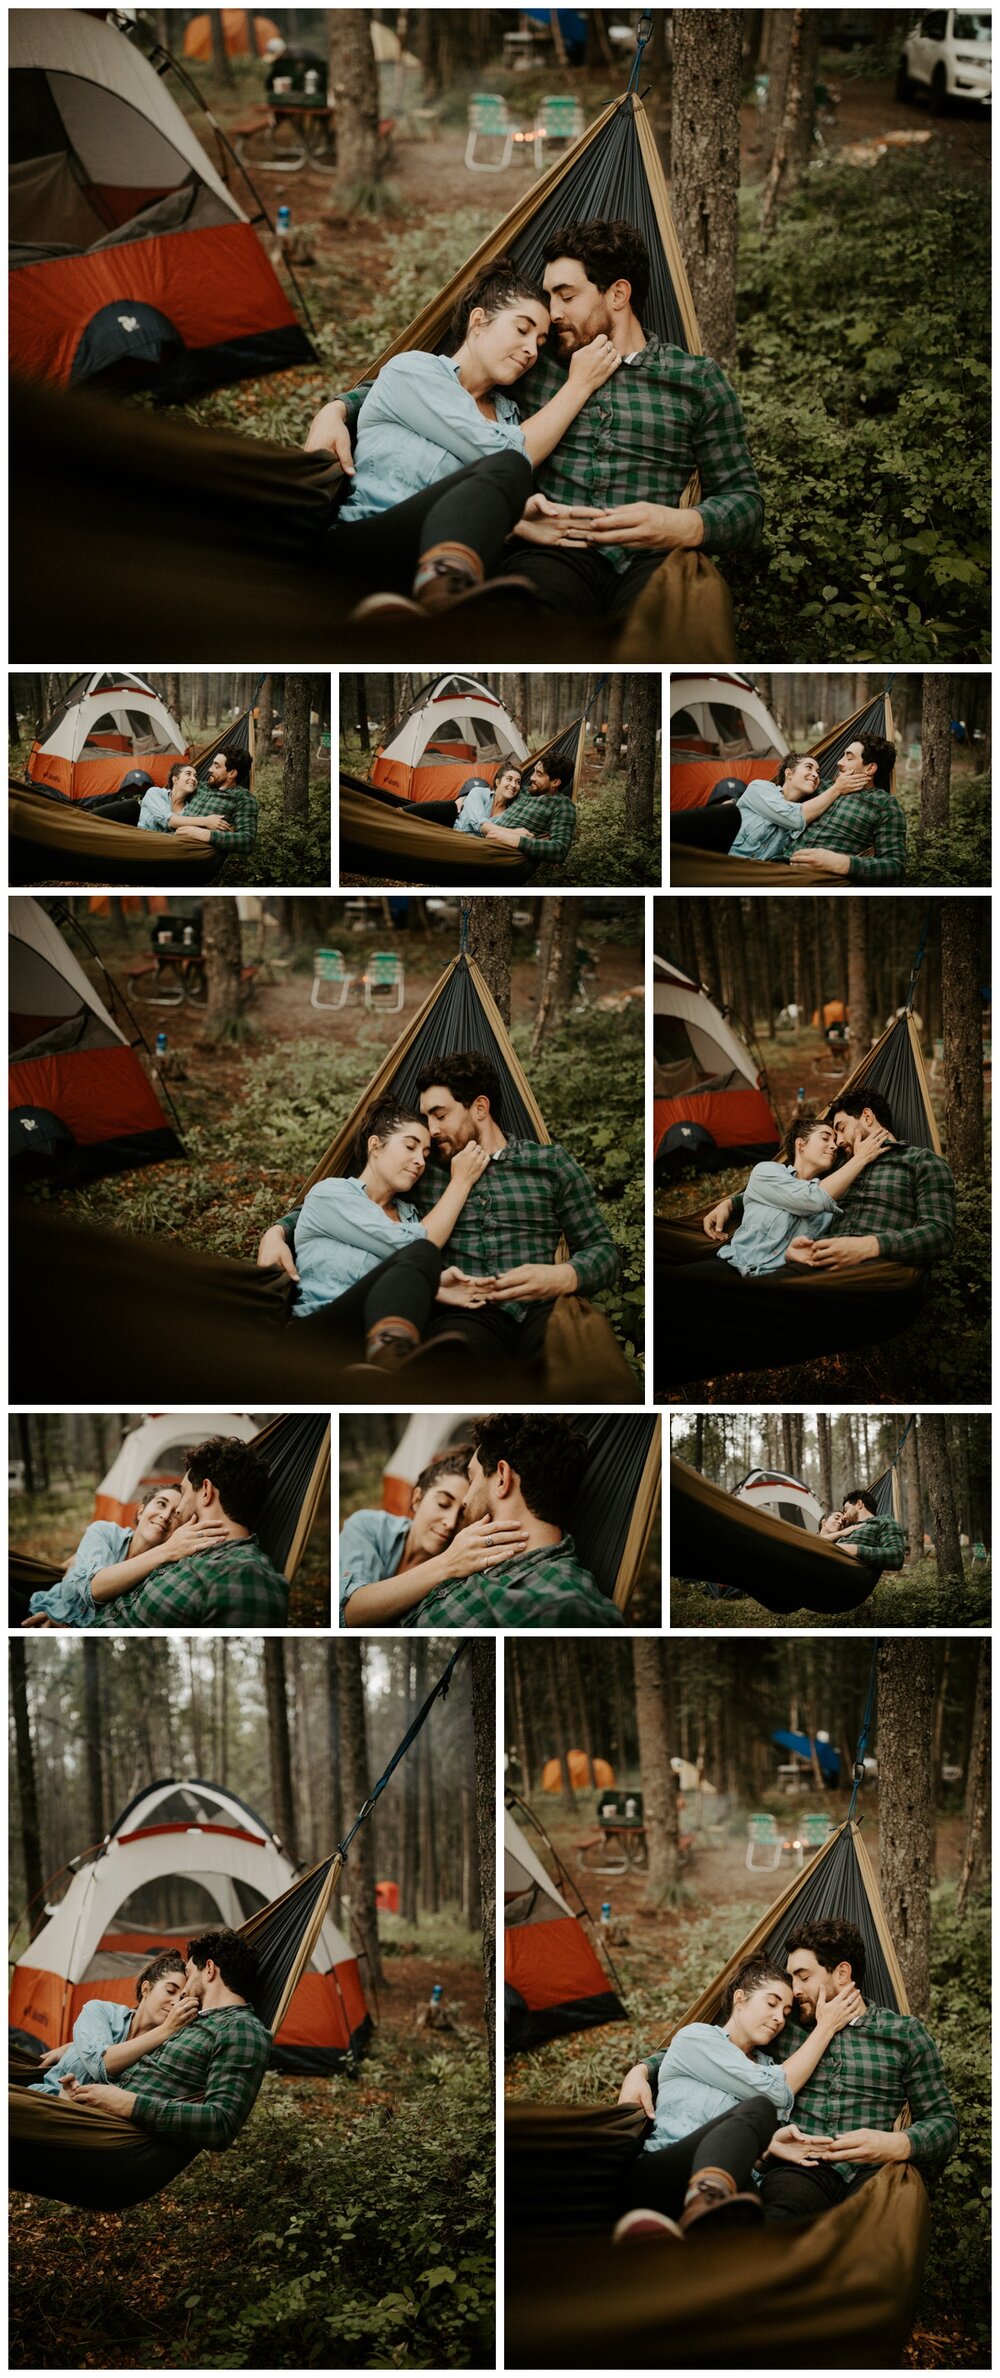 What’s camping without a hammock? A definite must to include in your camping engagement session!